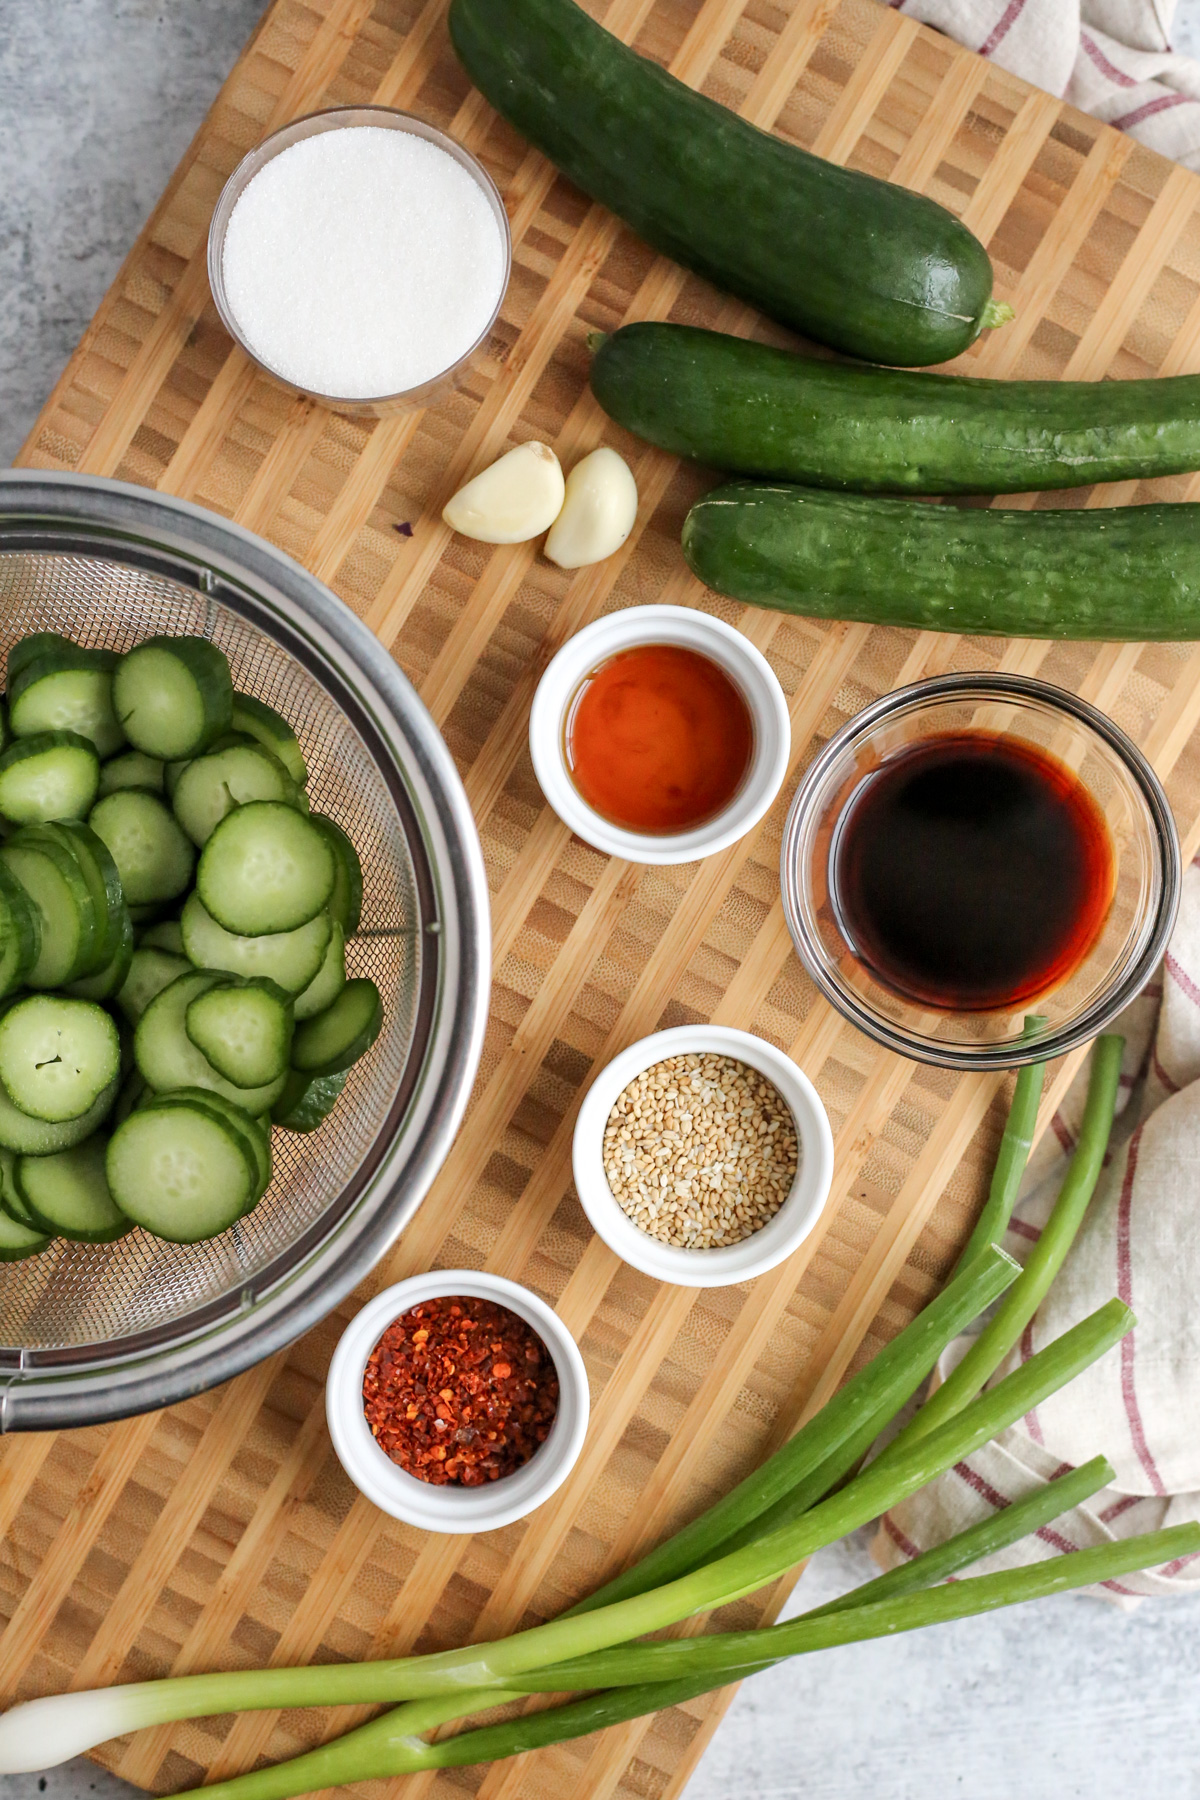 A wooden butcher block cutting board displays a stainless steel colander filled with sliced cucumbers with the sauce ingredients for oi muchim, spicy Korean cucumber salad, in small ramekins and dishes, with extra Persian cucumbers, garlic cloves, and green onions arranged within the frame